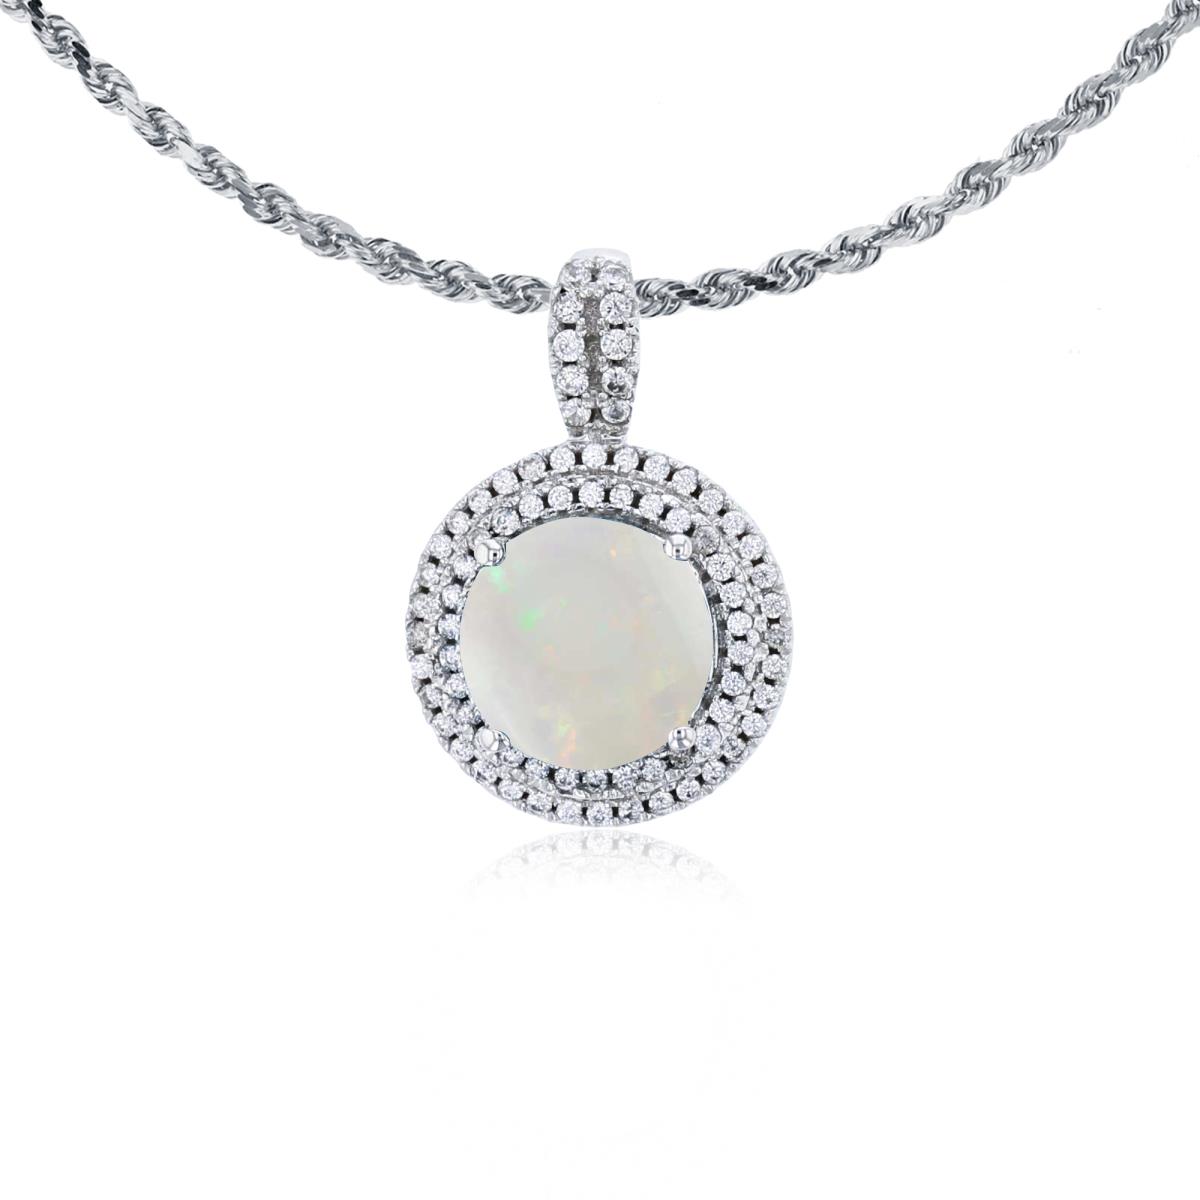 10K White Gold 7mm Round Opal & 0.25 CTTW Diamonds Double Halo 18" Rope Chain Necklace